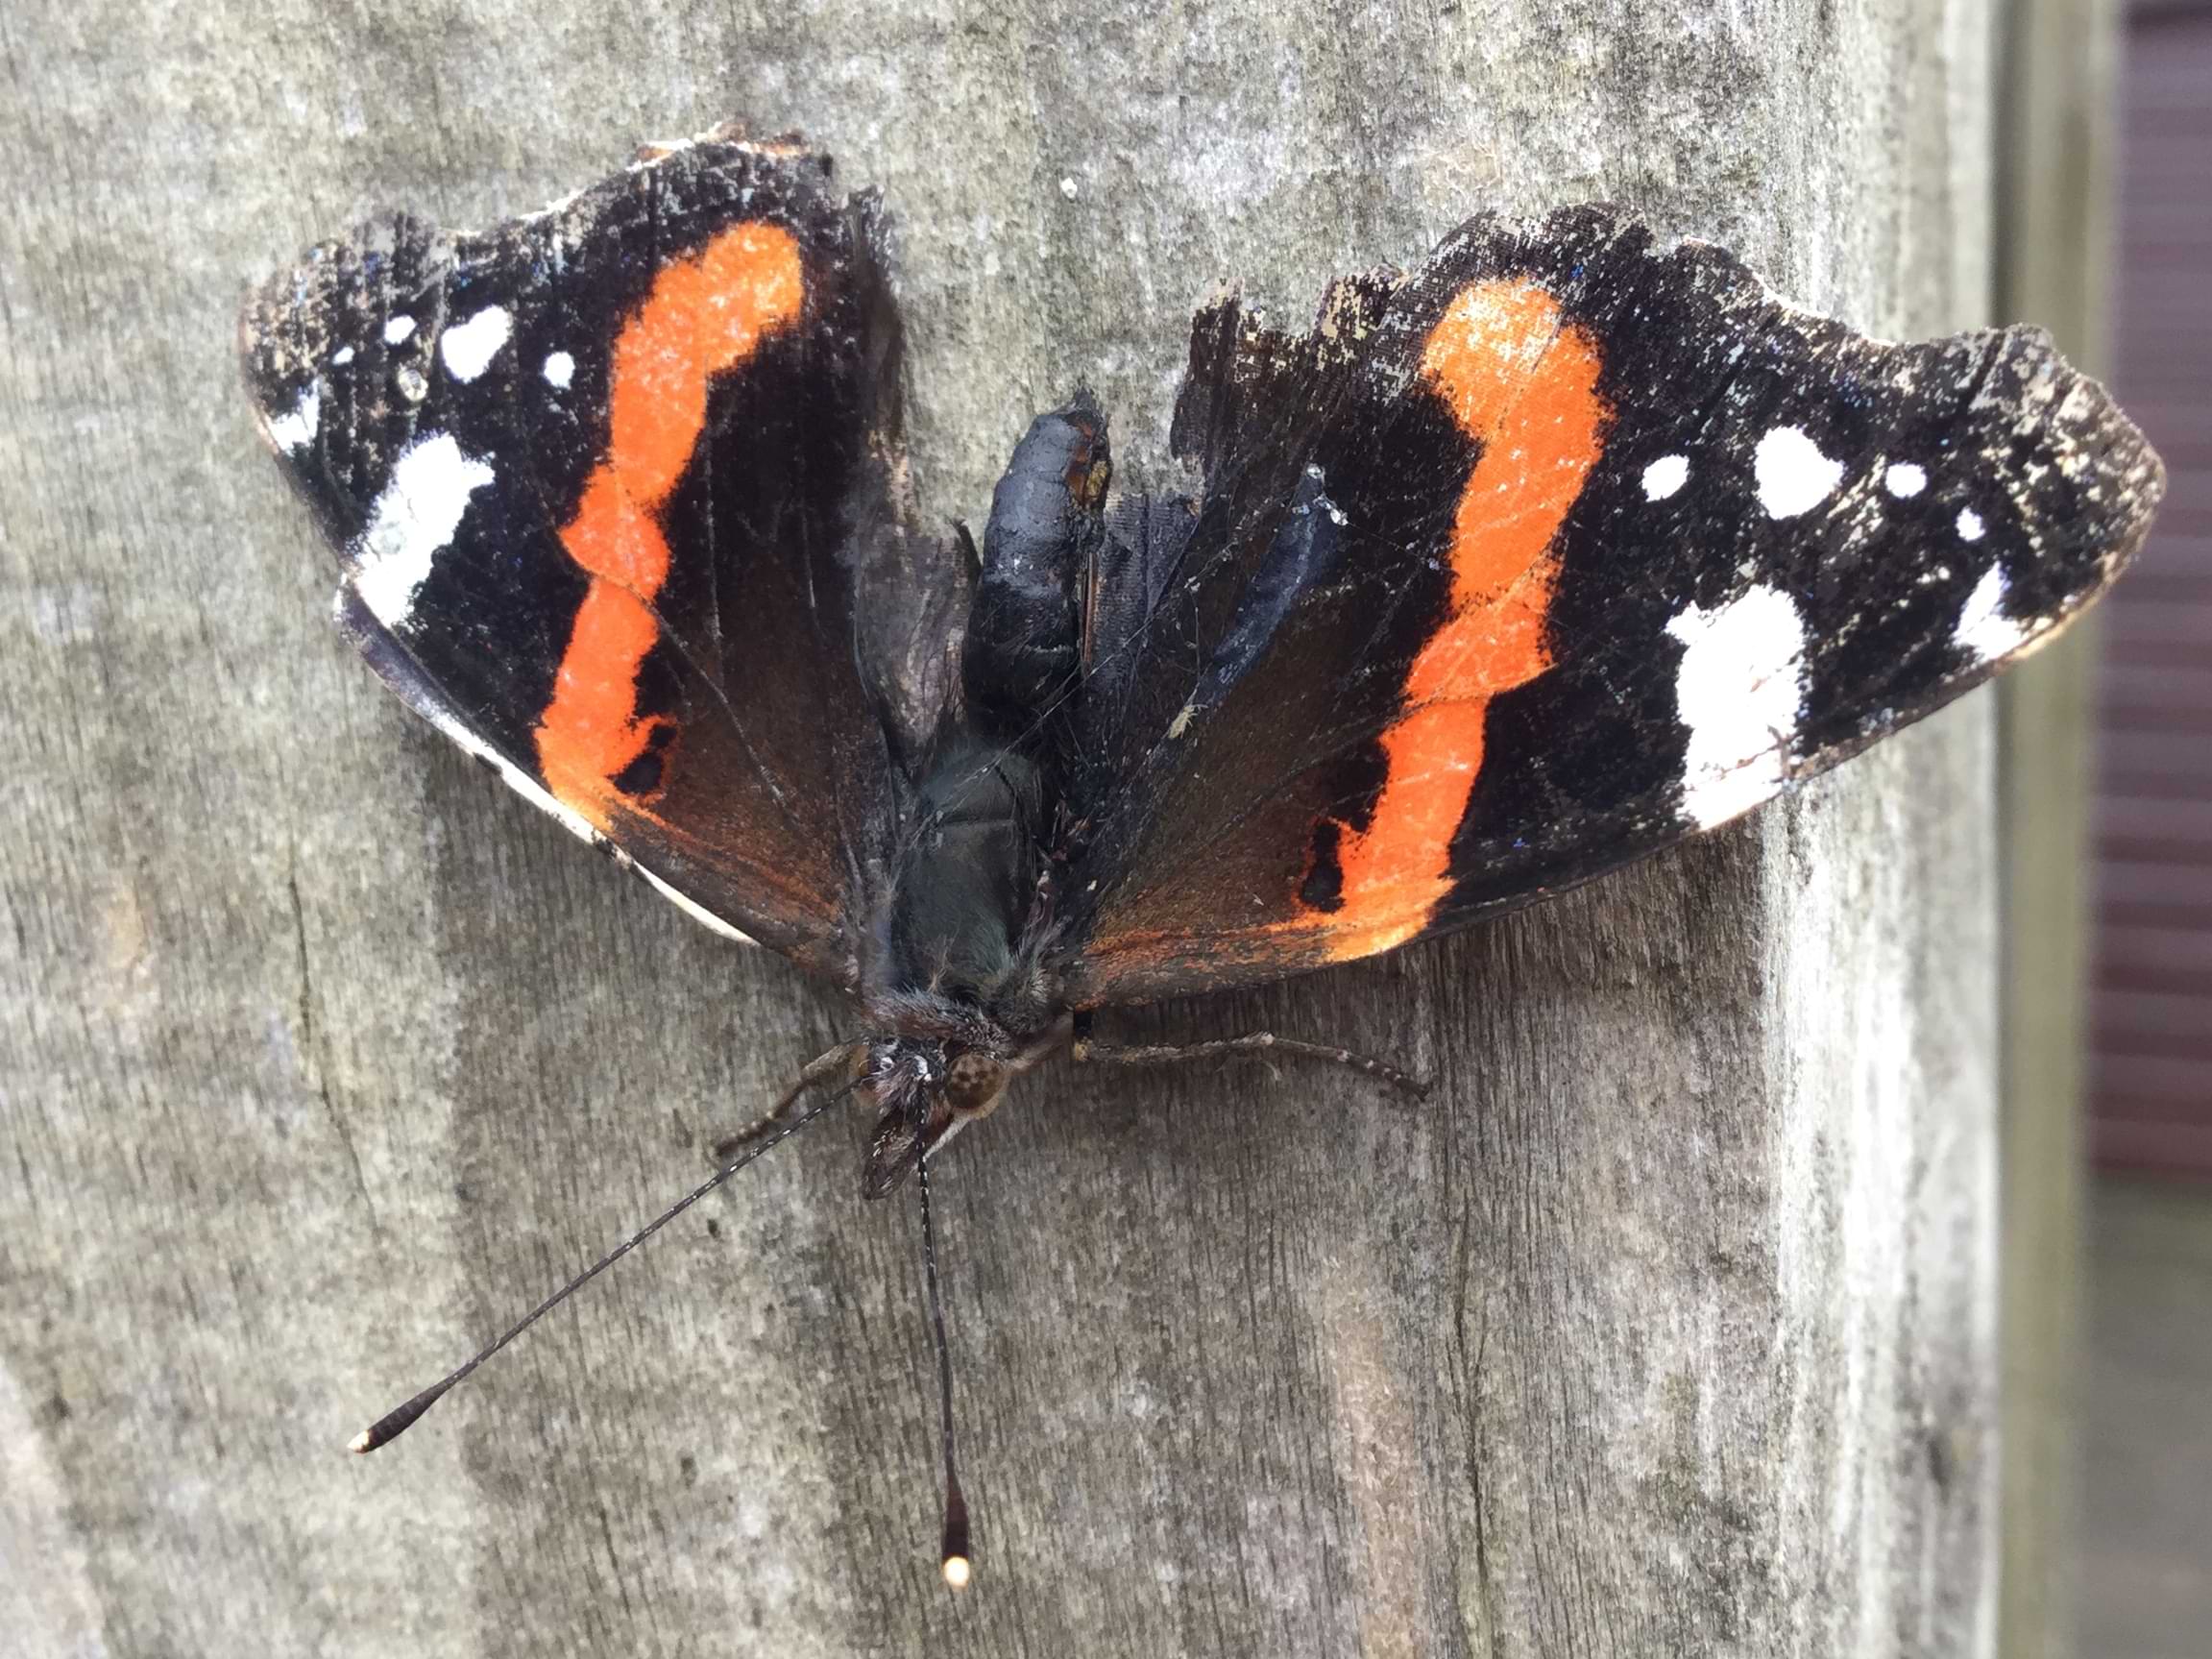 Another photo of the same butterfly. This image shows the butterfly with its wings open and outstretched.